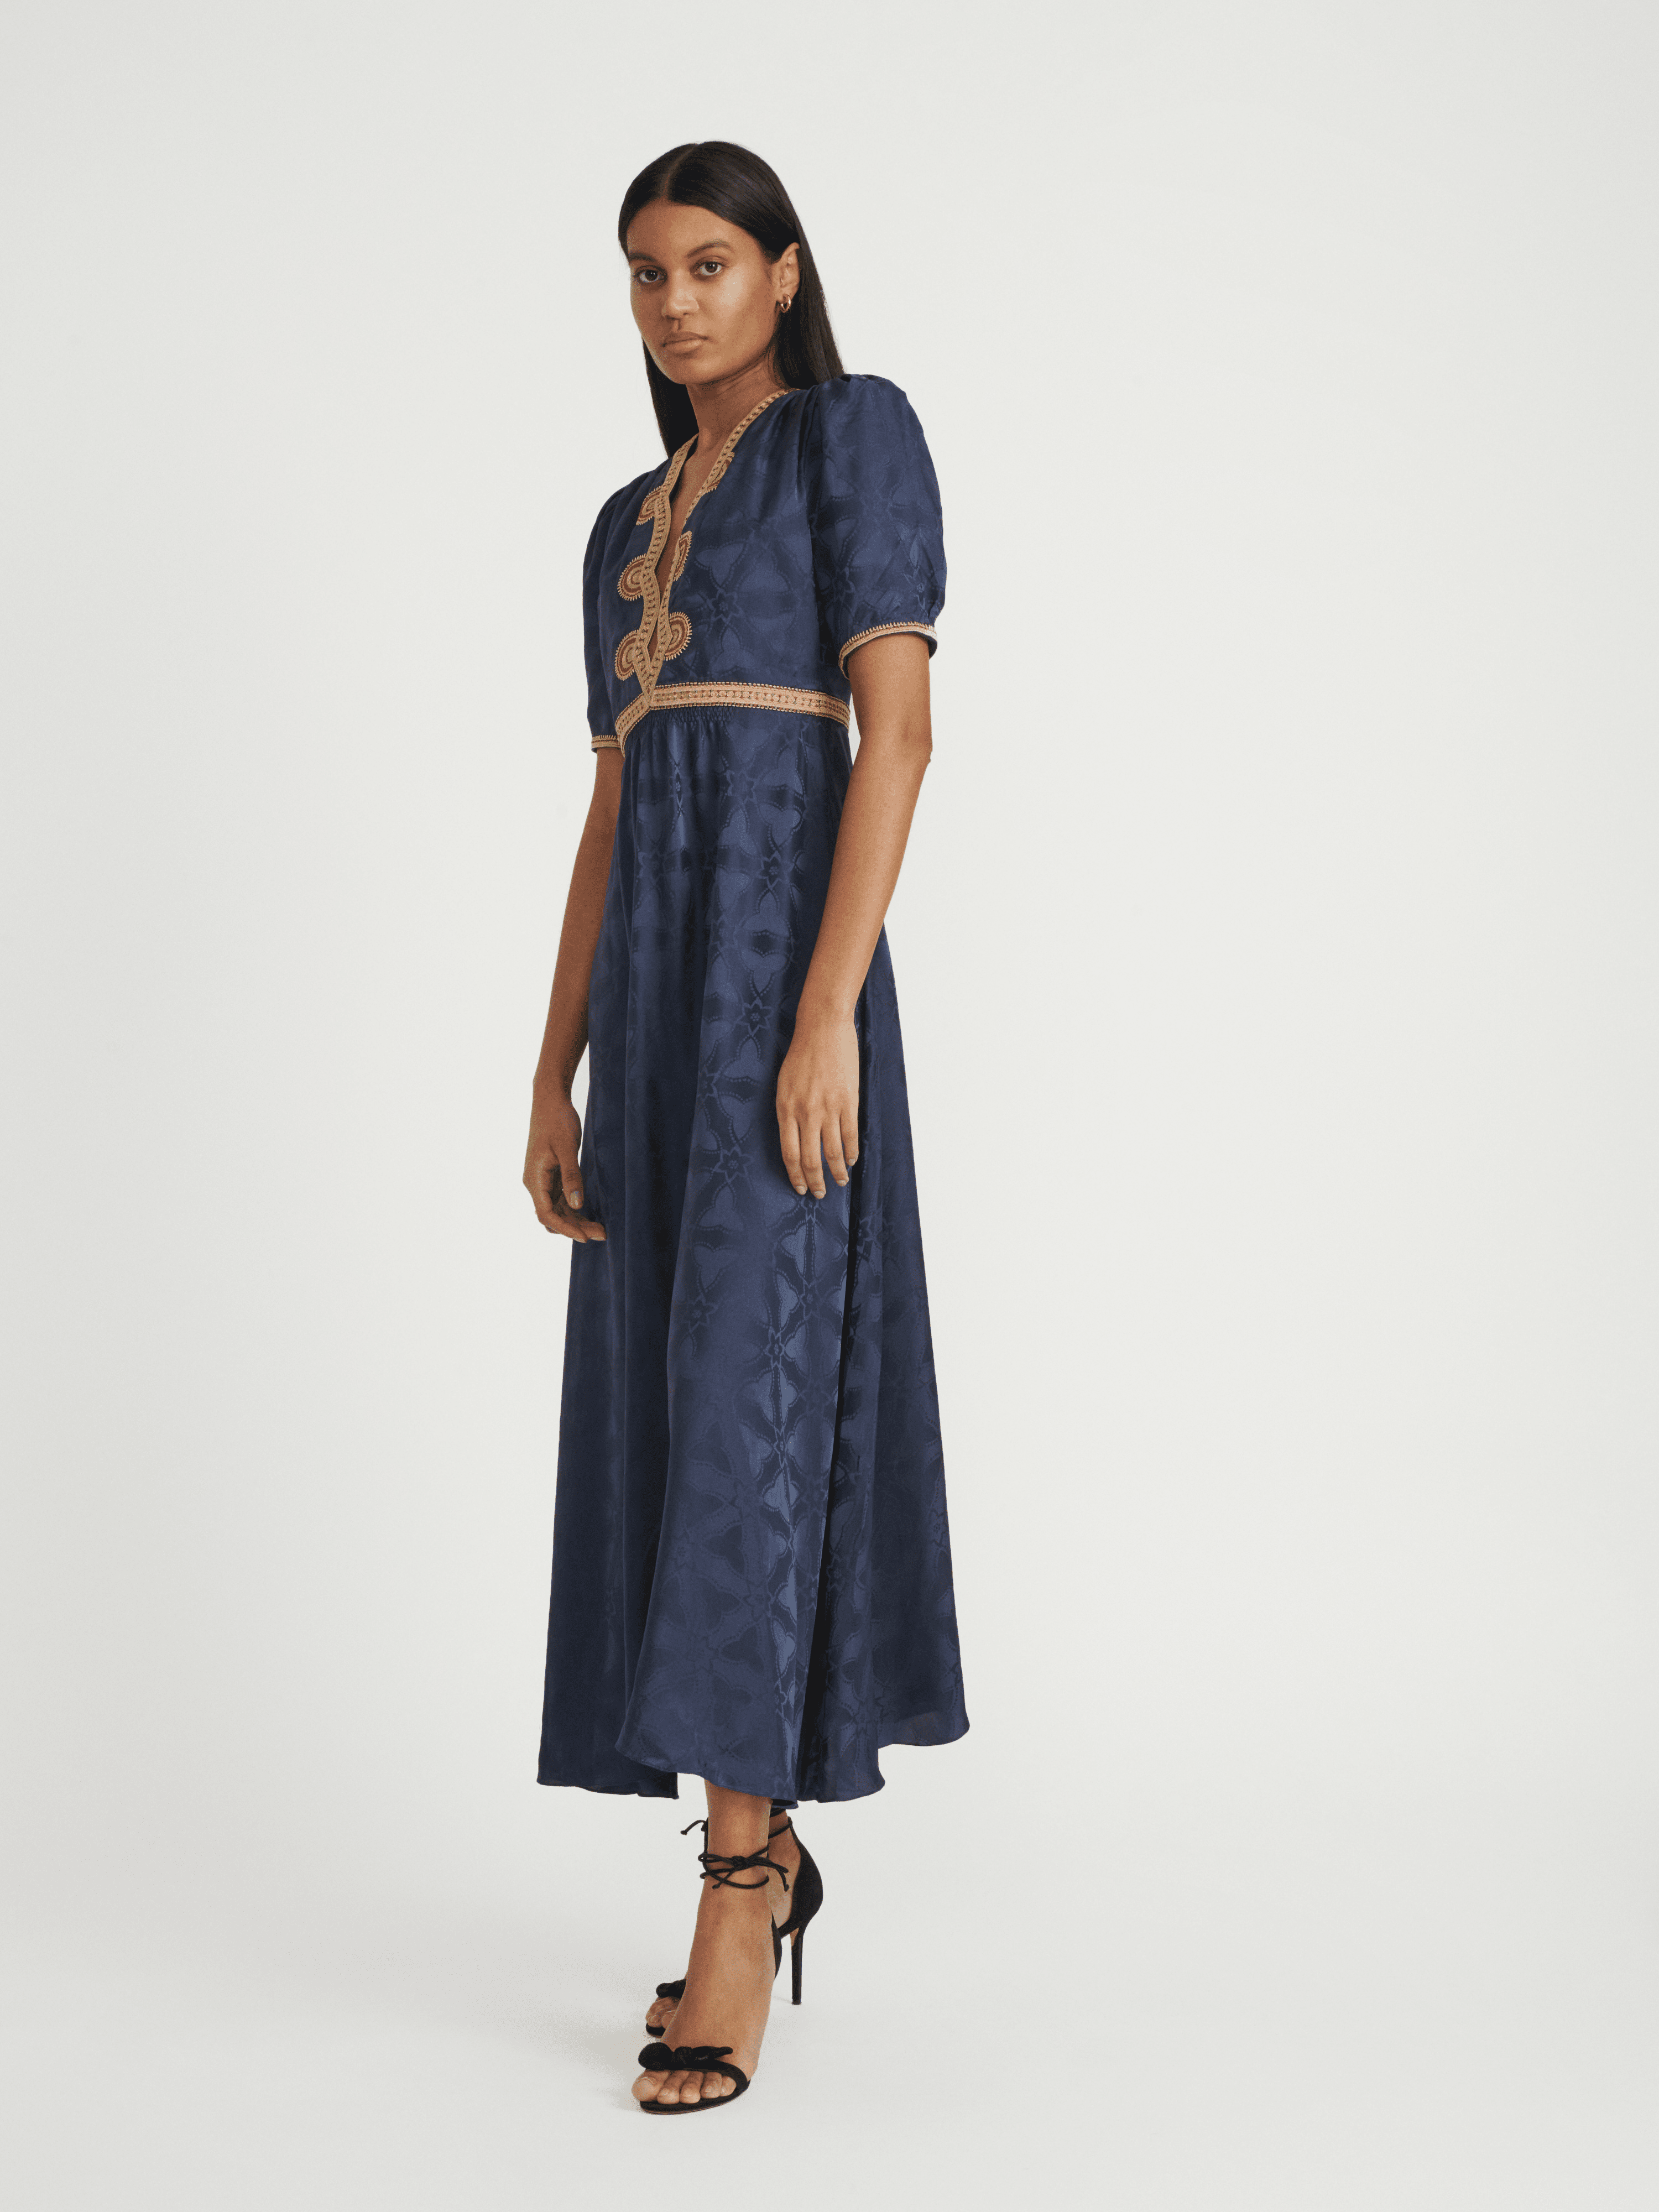 Tabitha Dress in Navy with Ornate Embroidery